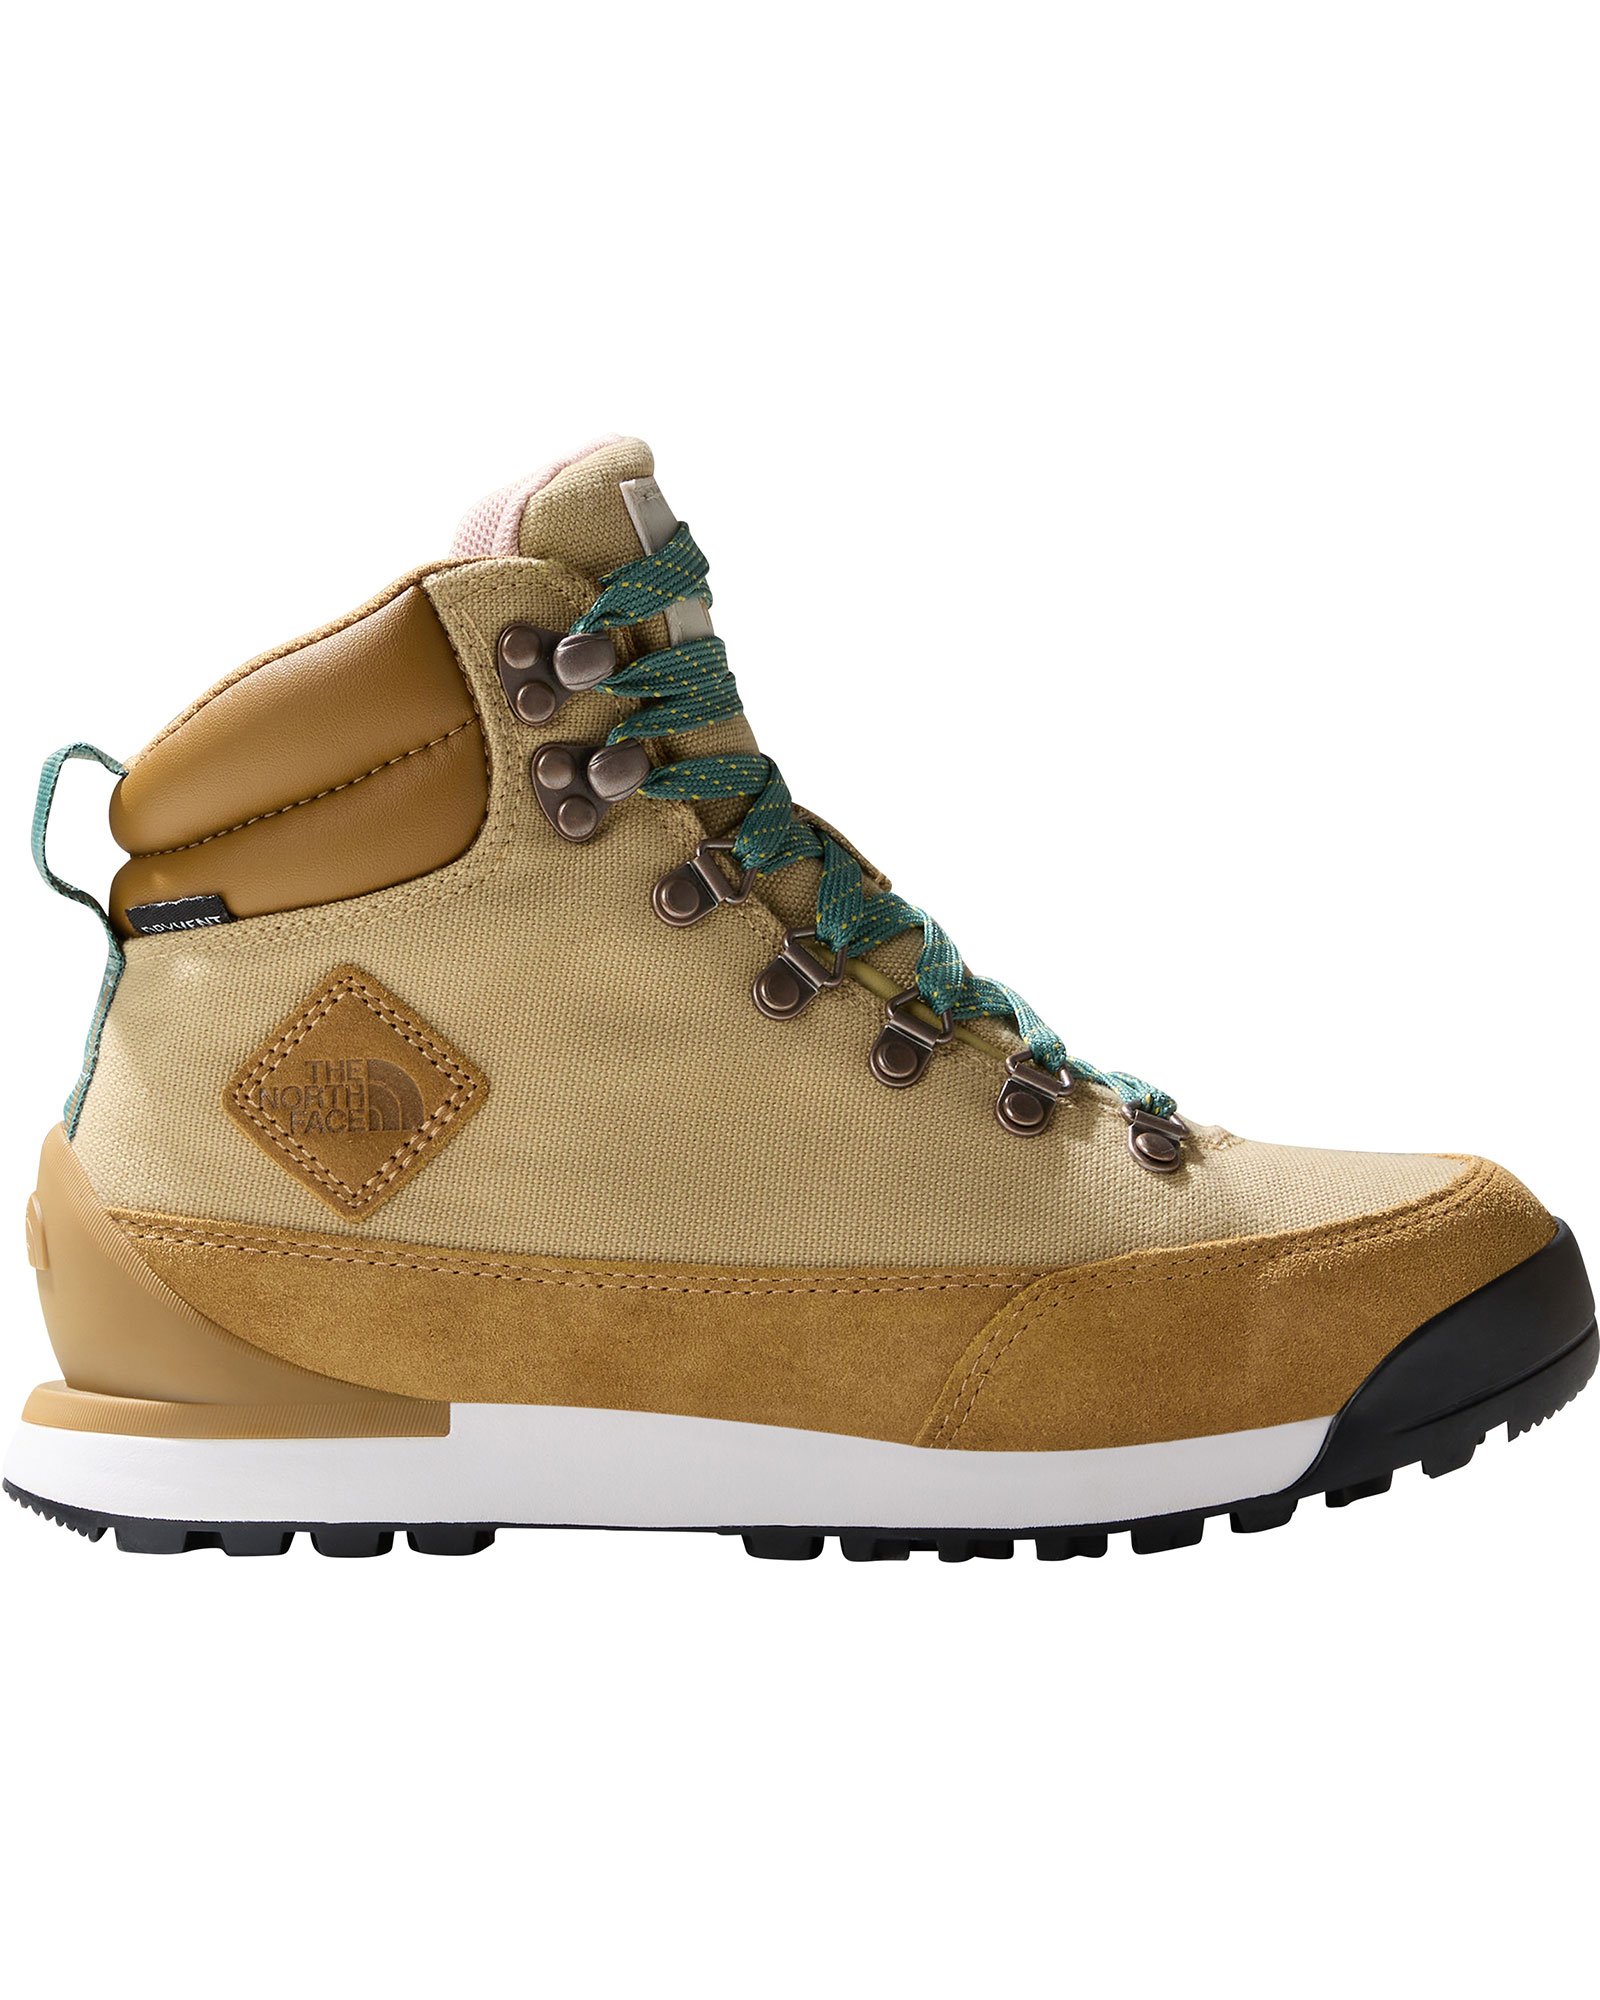 The North Face Back to Berkeley IV Textile Waterproof Women’s Boots - Khaki Stone/Utility Brown UK 5